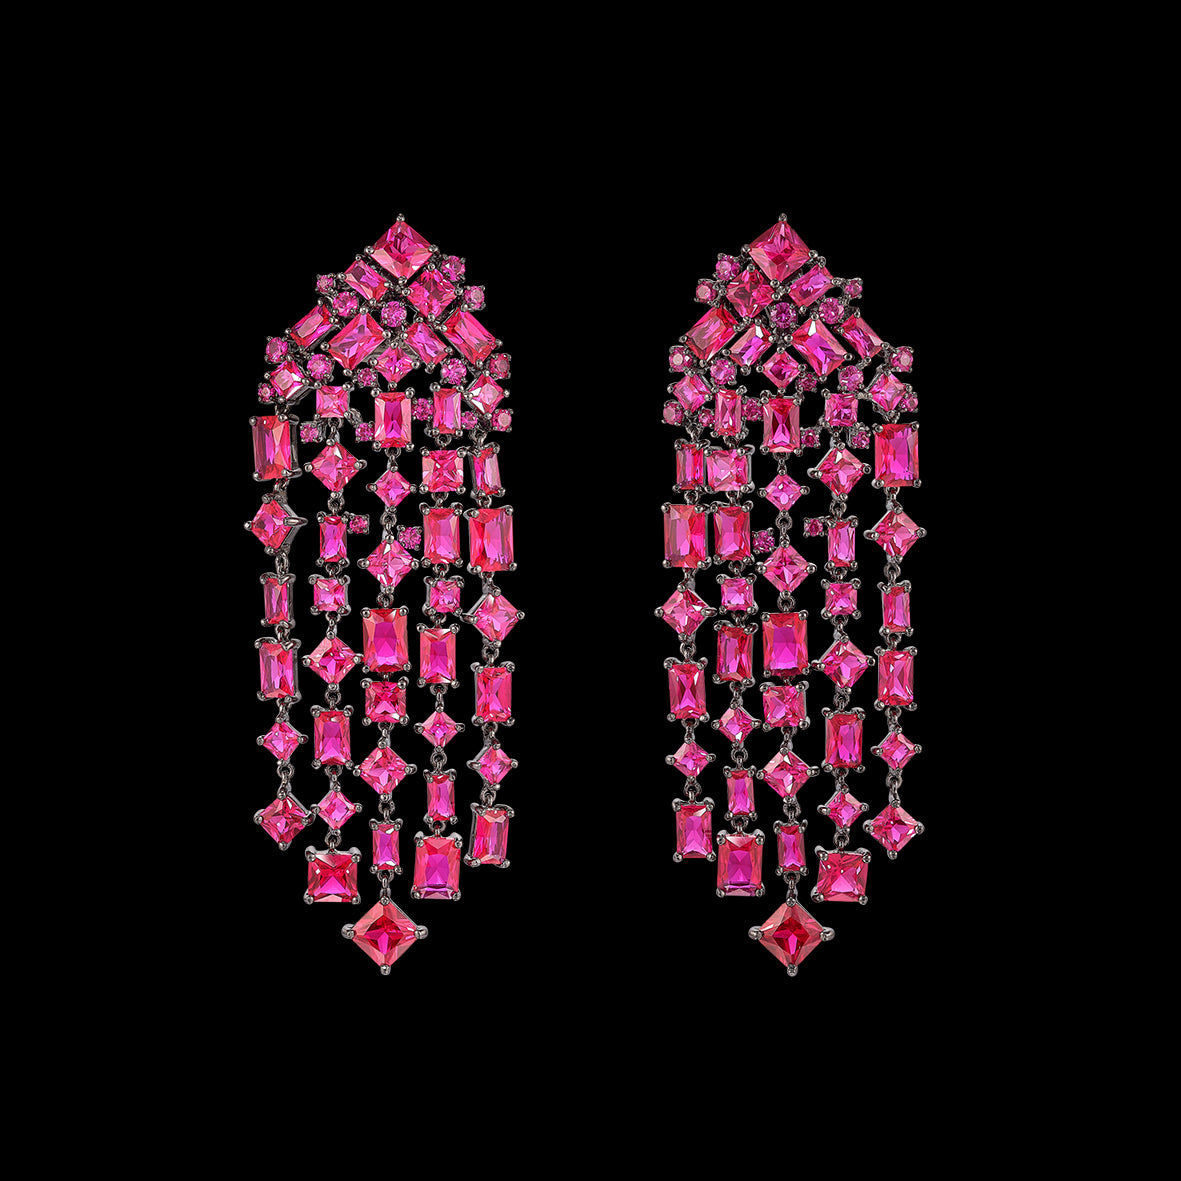 Crimson Cascade Earrings, Earrings, Anabela Chan Joaillerie - Fine jewelry with laboratory grown and created gemstones hand-crafted in the United Kingdom. Anabela Chan Joaillerie is the first fine jewellery brand in the world to champion laboratory-grown and created gemstones with high jewellery design, artisanal craftsmanship and a focus on ethical and sustainable innovations.